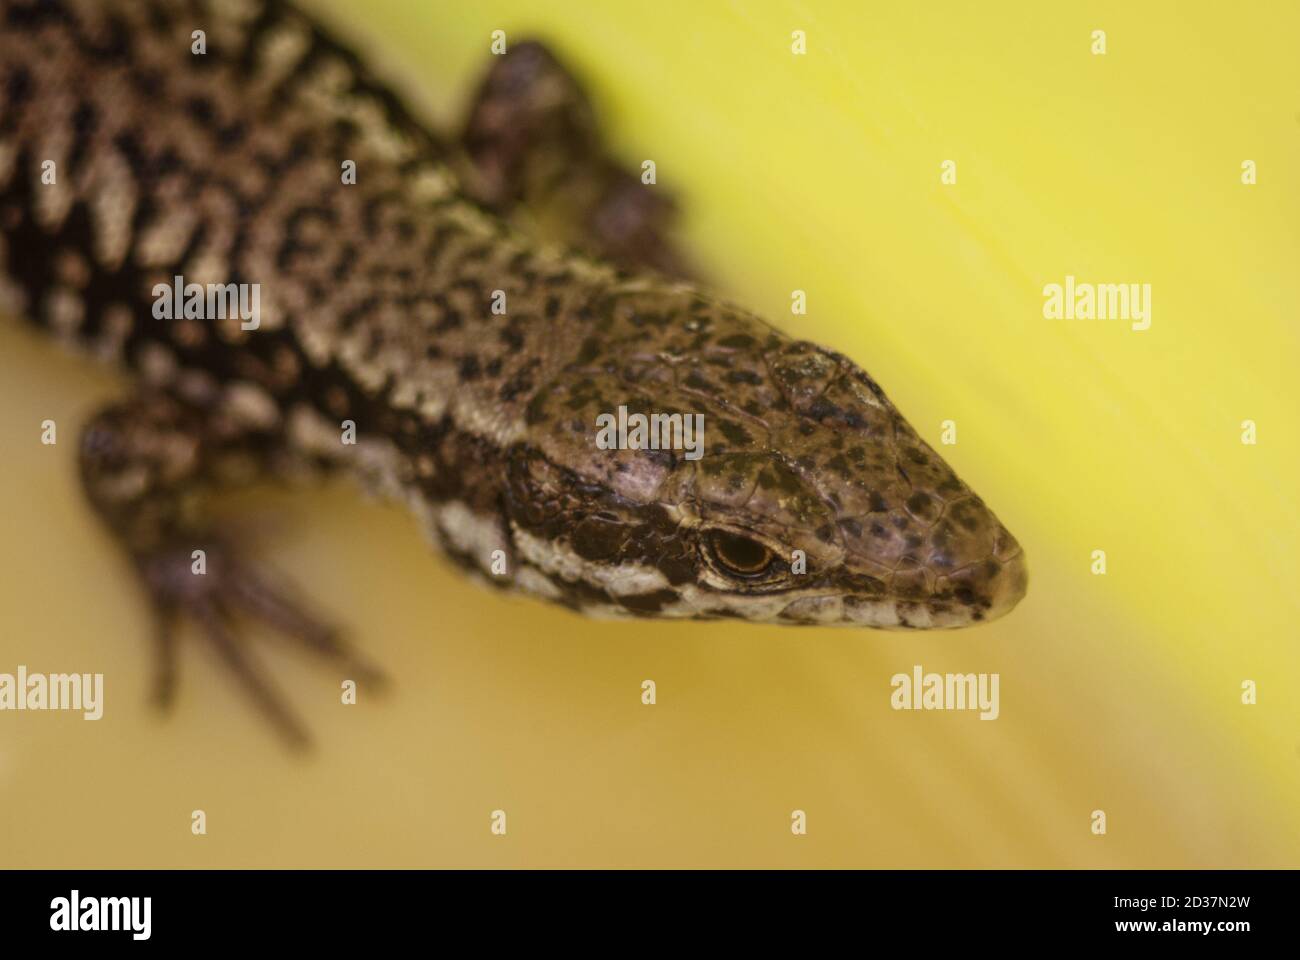 amazing lizard body head dotted colorful patern Stock Photo